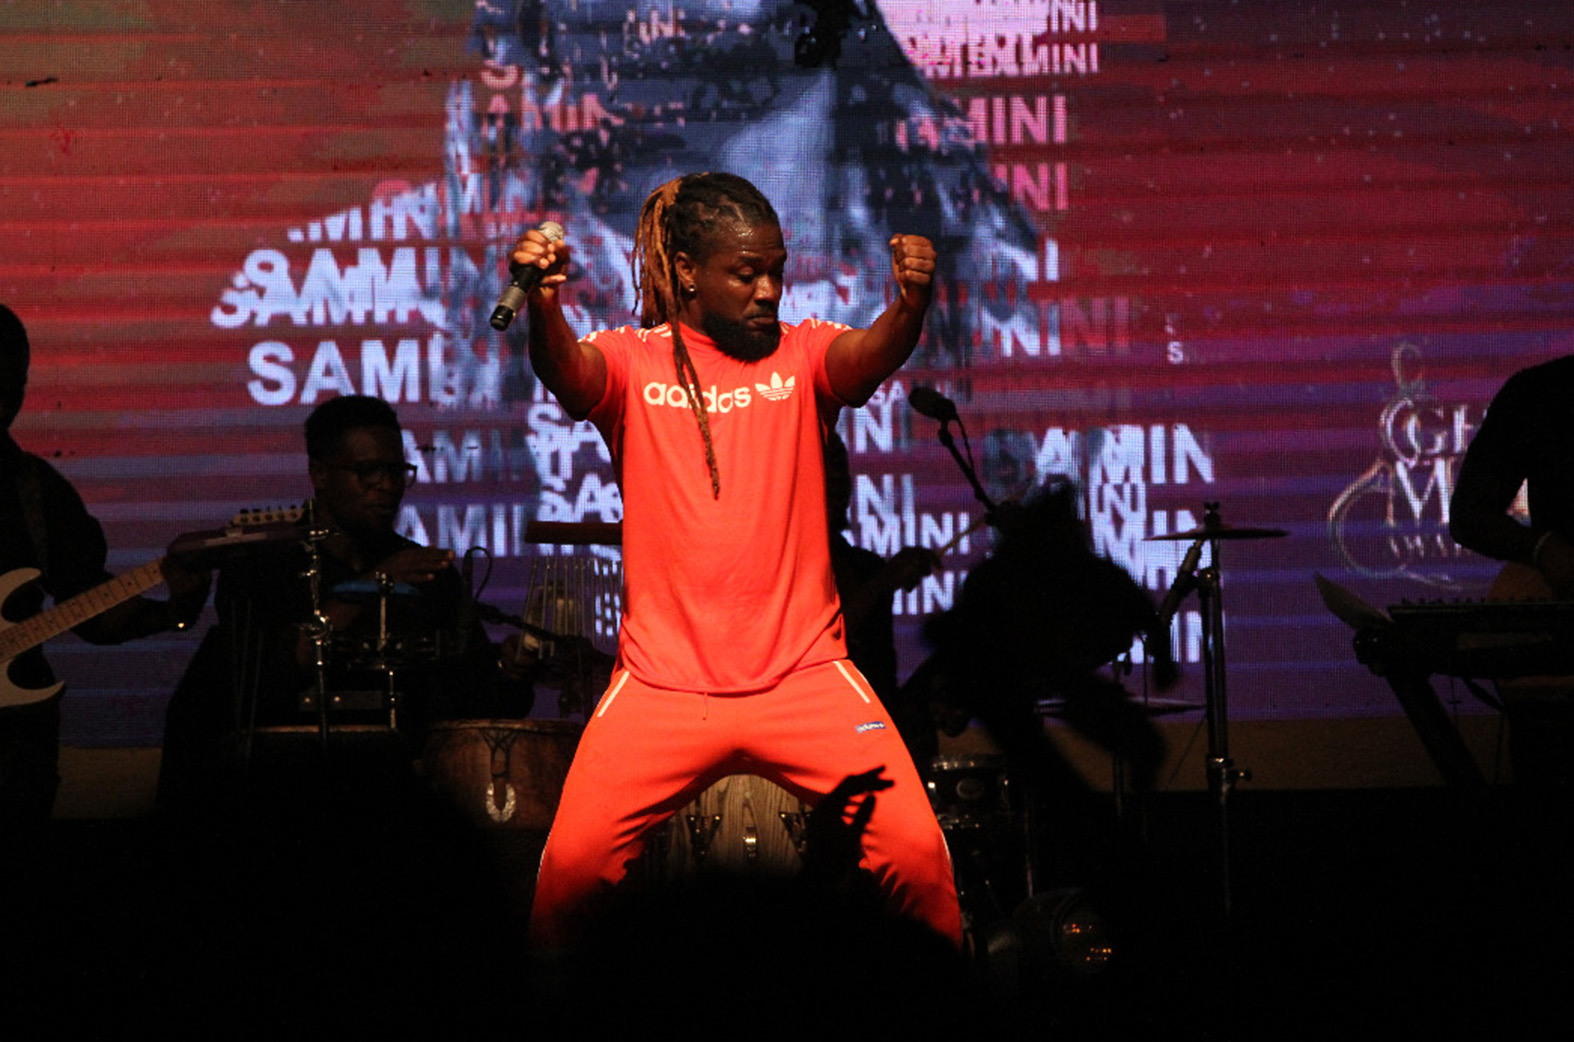 Samini to excite fans at MMC Live 2018 this April